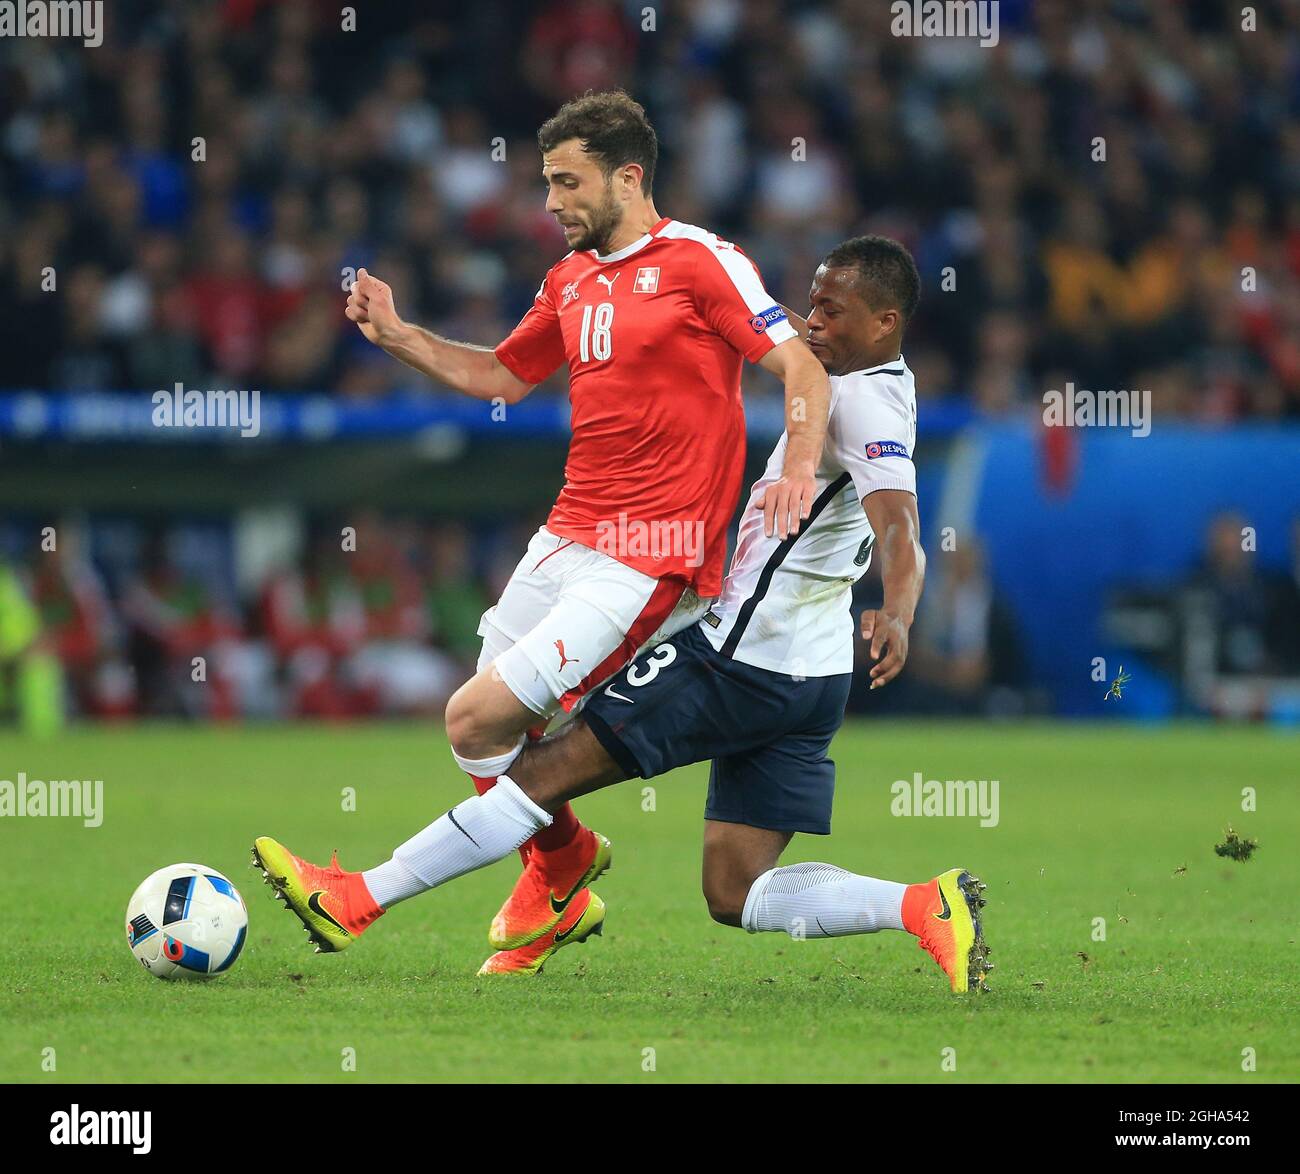 Switzerland's Admir Mehmedi tussles with France's Patrice Evra during the UEFA European Championship 2016 match at the Stade Pierre-Mauroy, Lille. Picture date June 19th, 2016 Pic David Klein/Sportimage via PA Images Stock Photo